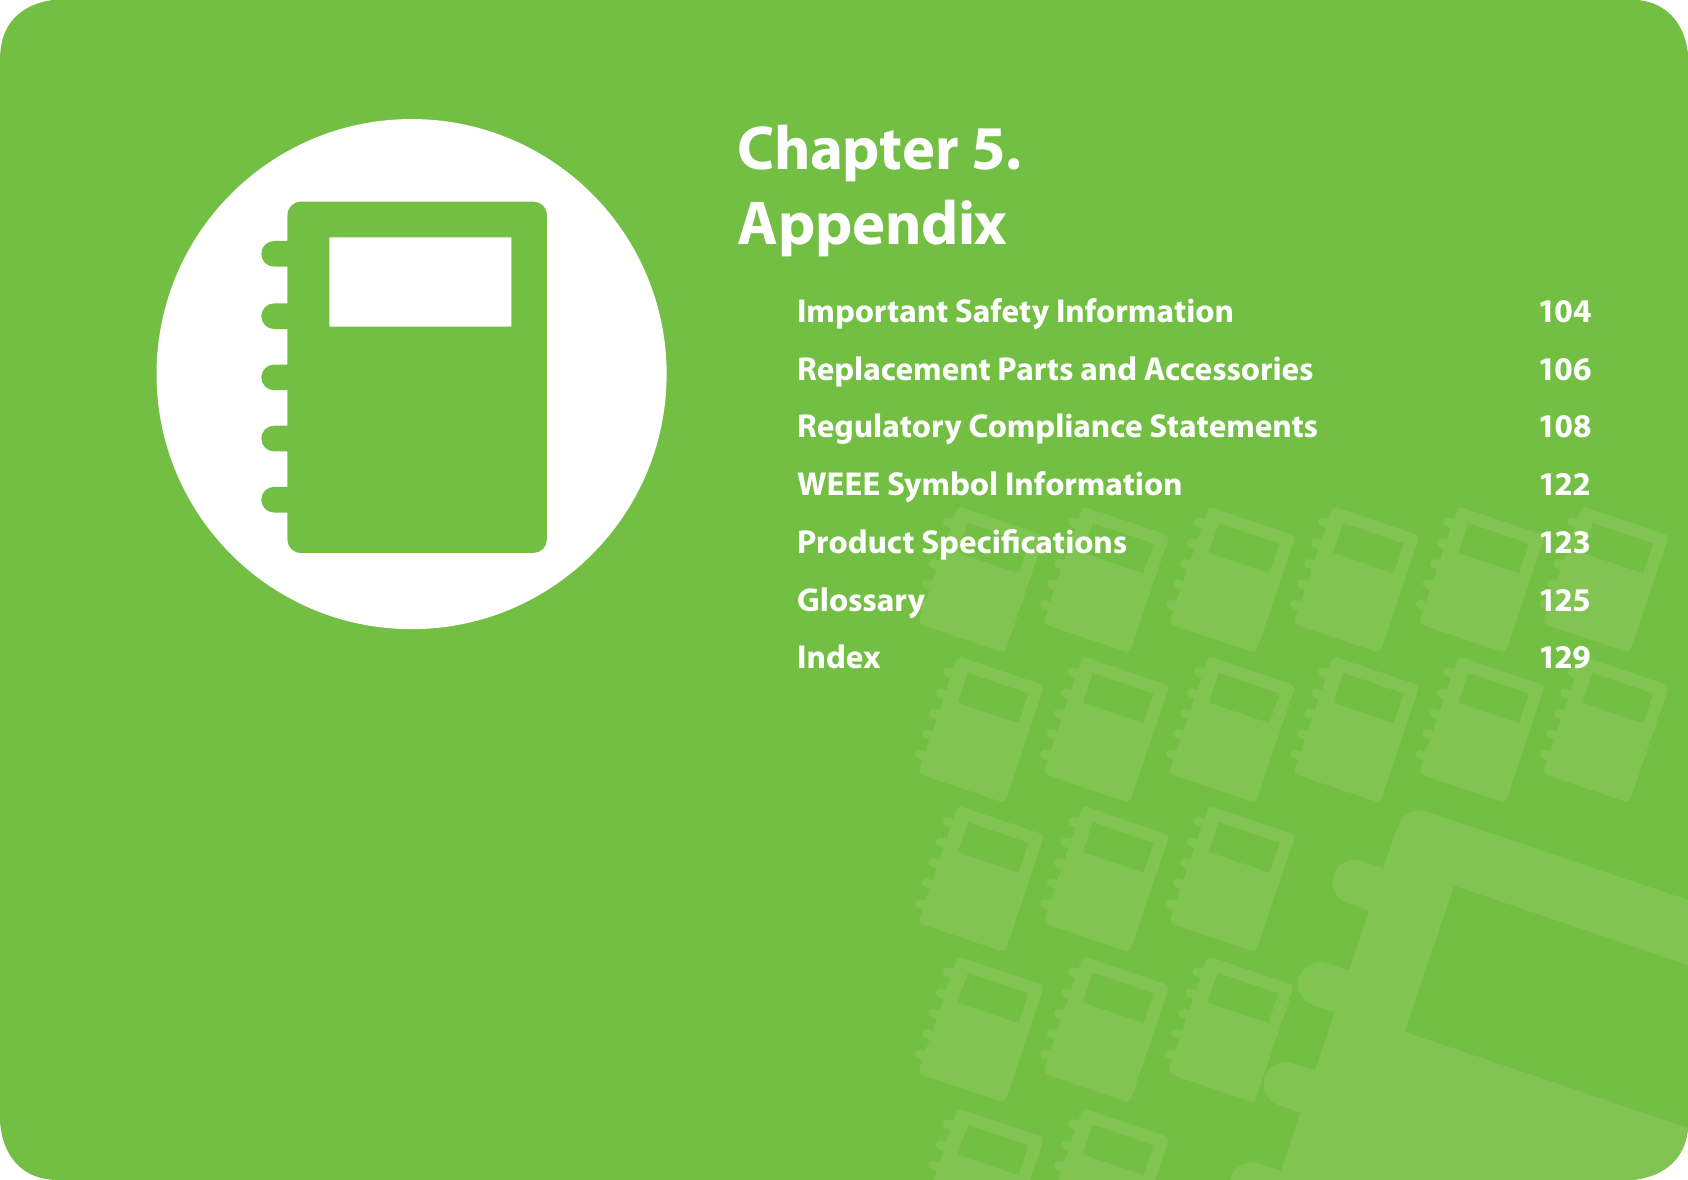  Chapter  5. AppendixImportant Safety Information  104Replacement Parts and Accessories  106Regulatory Compliance Statements  108WEEE Symbol Information  122Product Speci cations  123Glossary 125Index 129